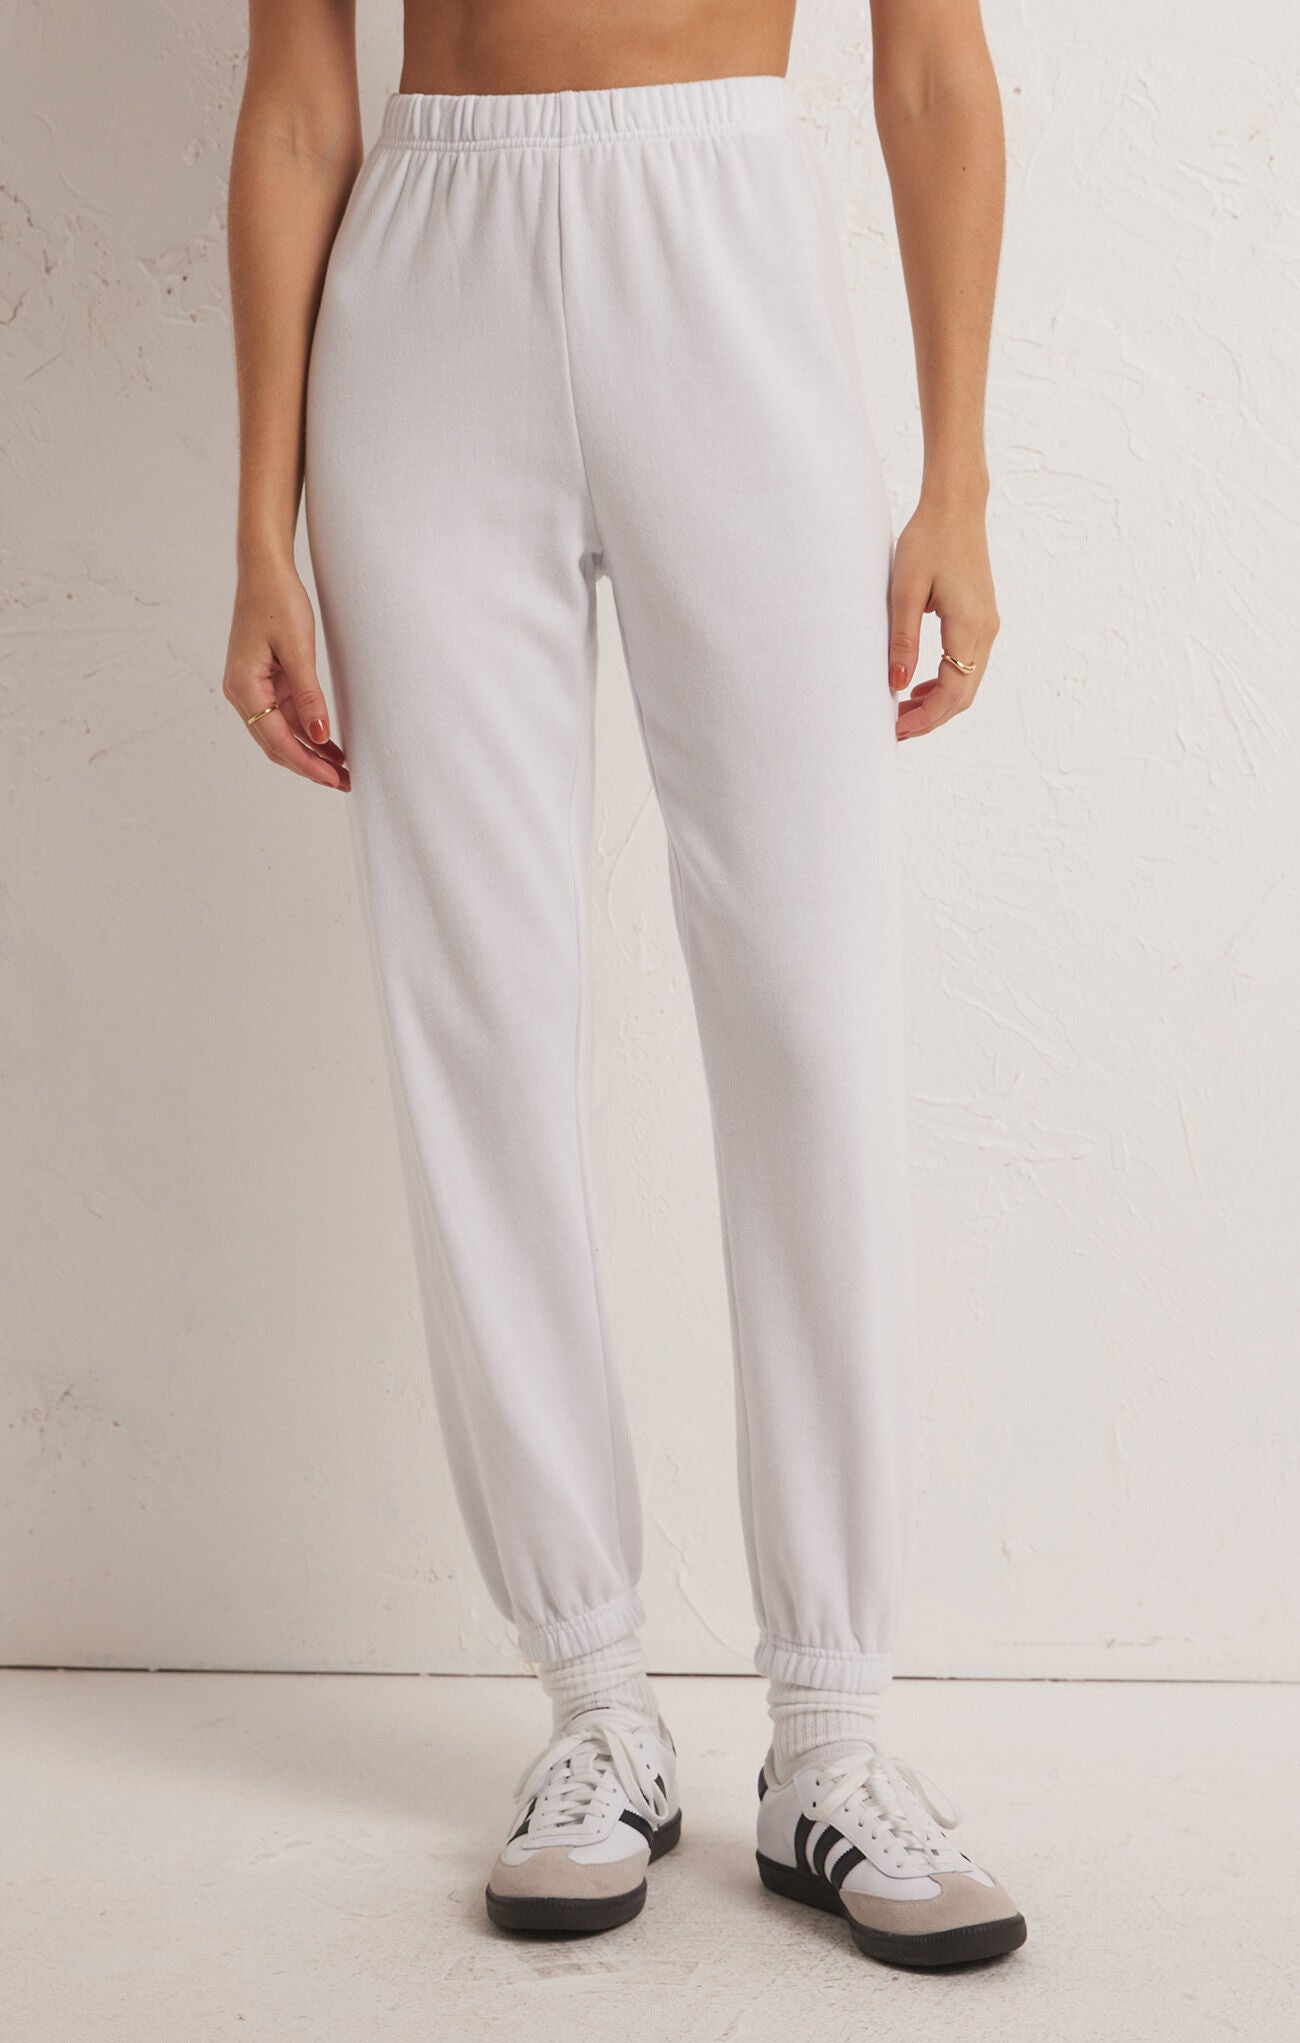 Model image of white joggers